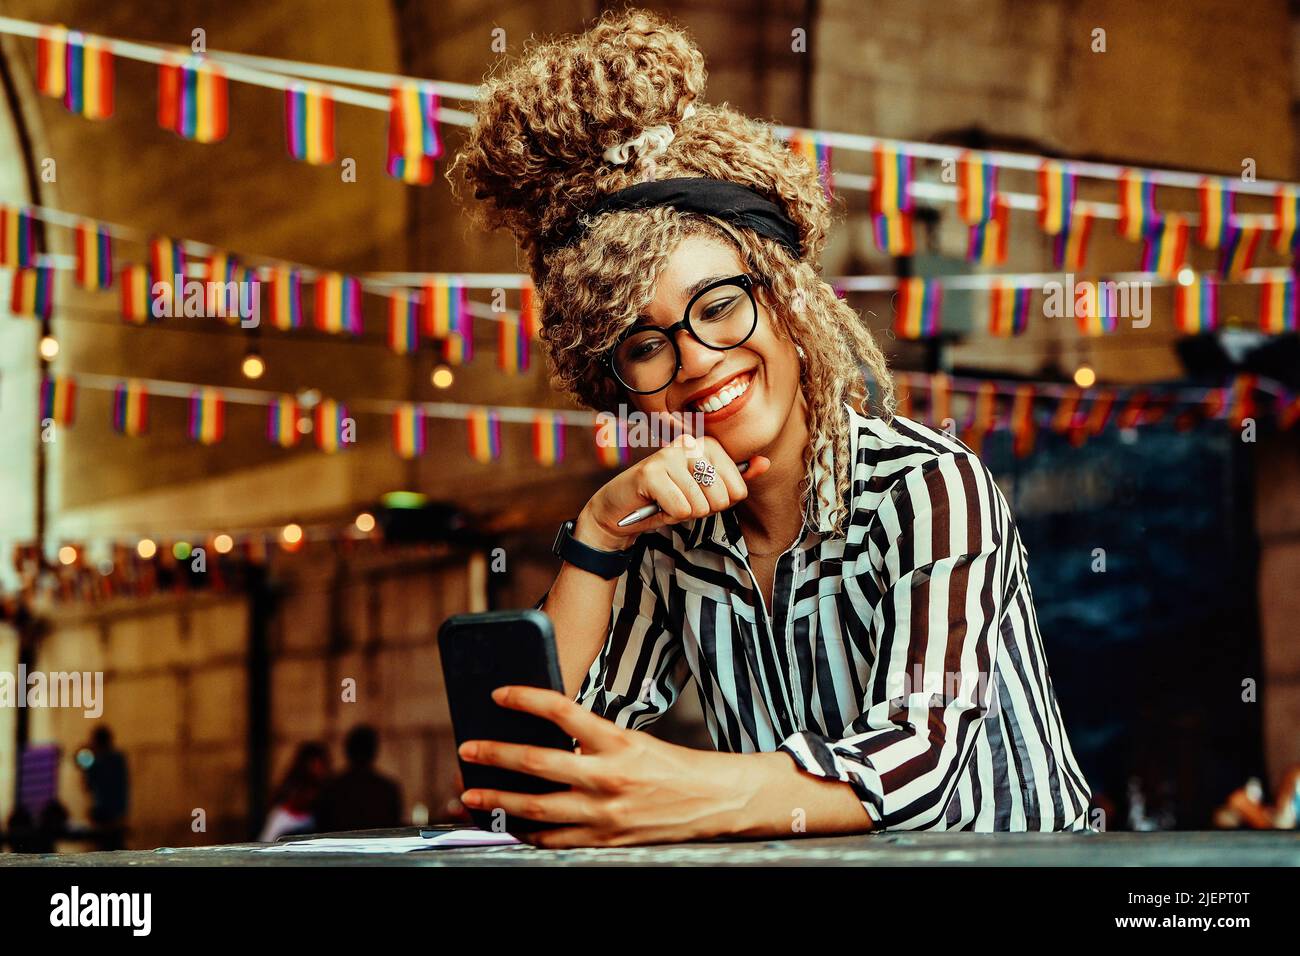 Portrait of smiling woman having video call on smartphone sitting in a coffeehouse shot Stock Photo